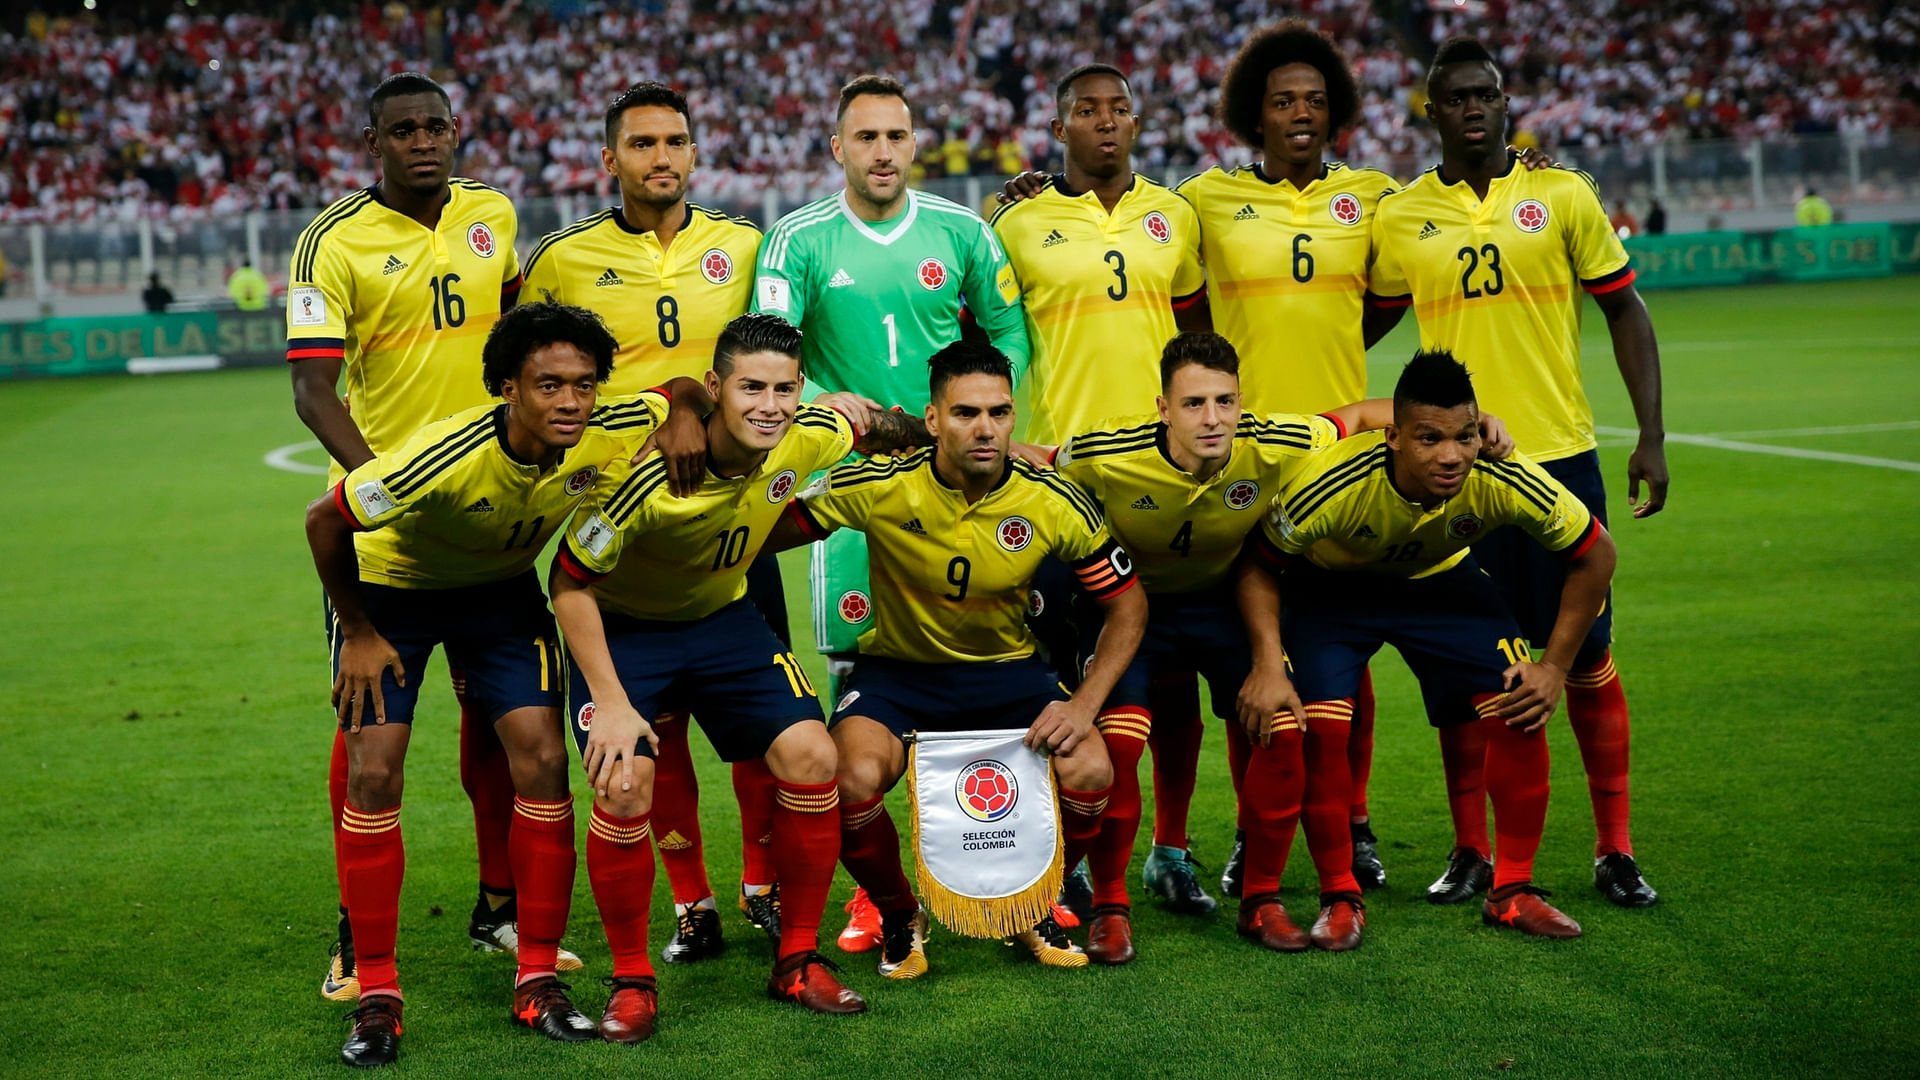 FIFA World Cup Preview Since 2014 Highs, a Struggle for Colombia, James